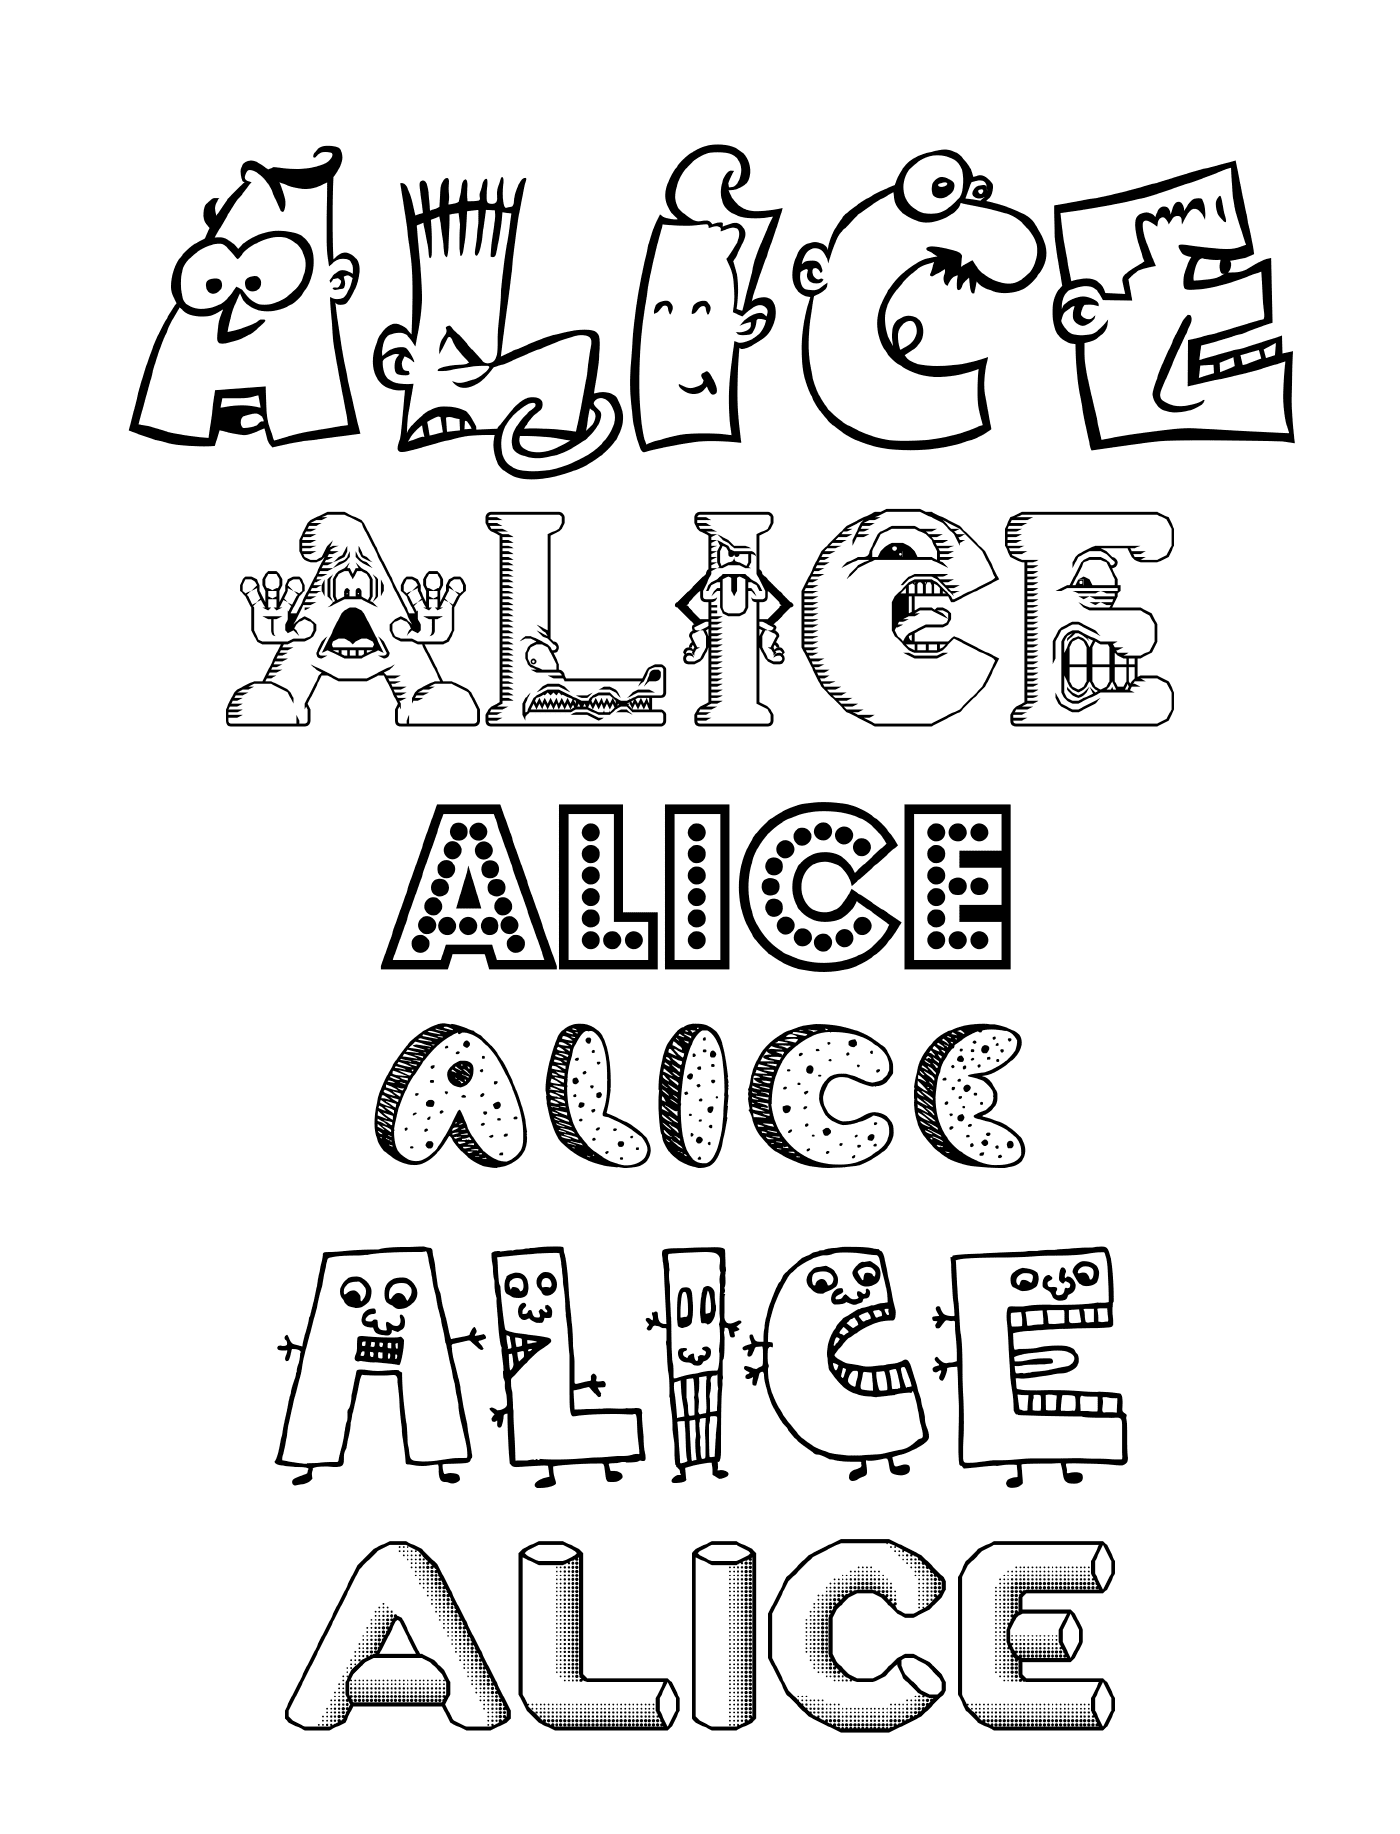  A letter from Alice 